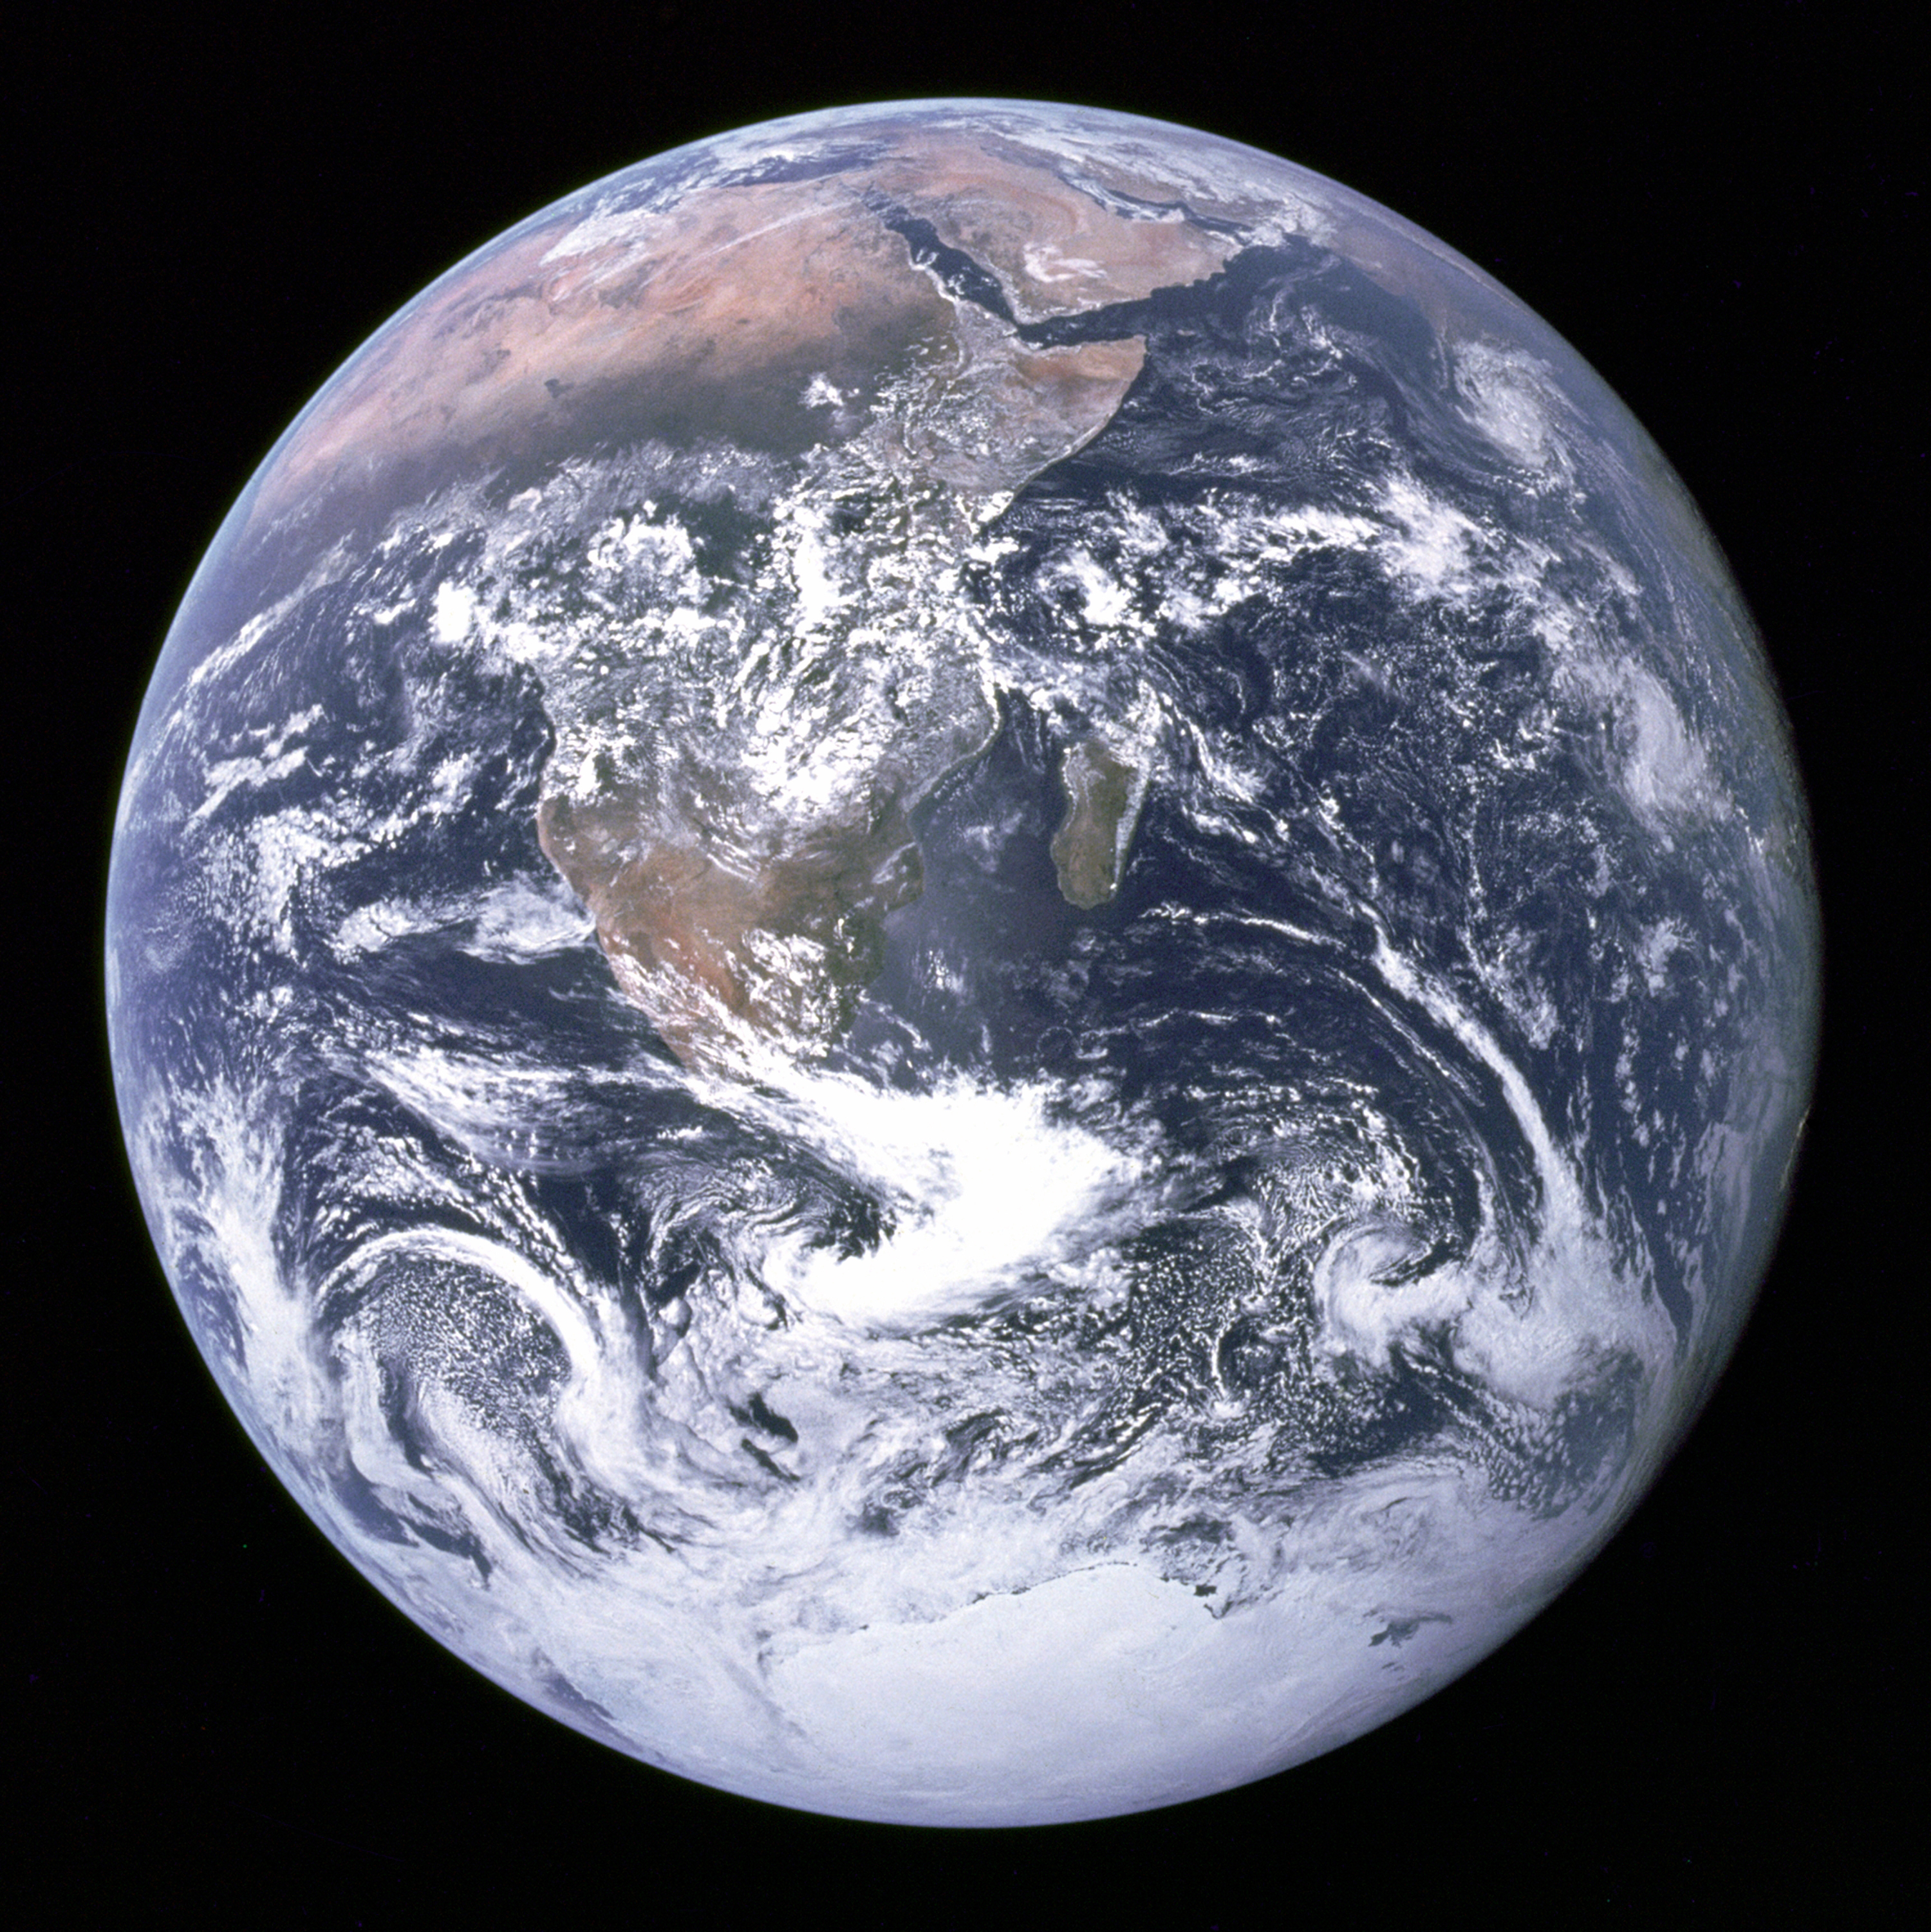 The Blue Marble image